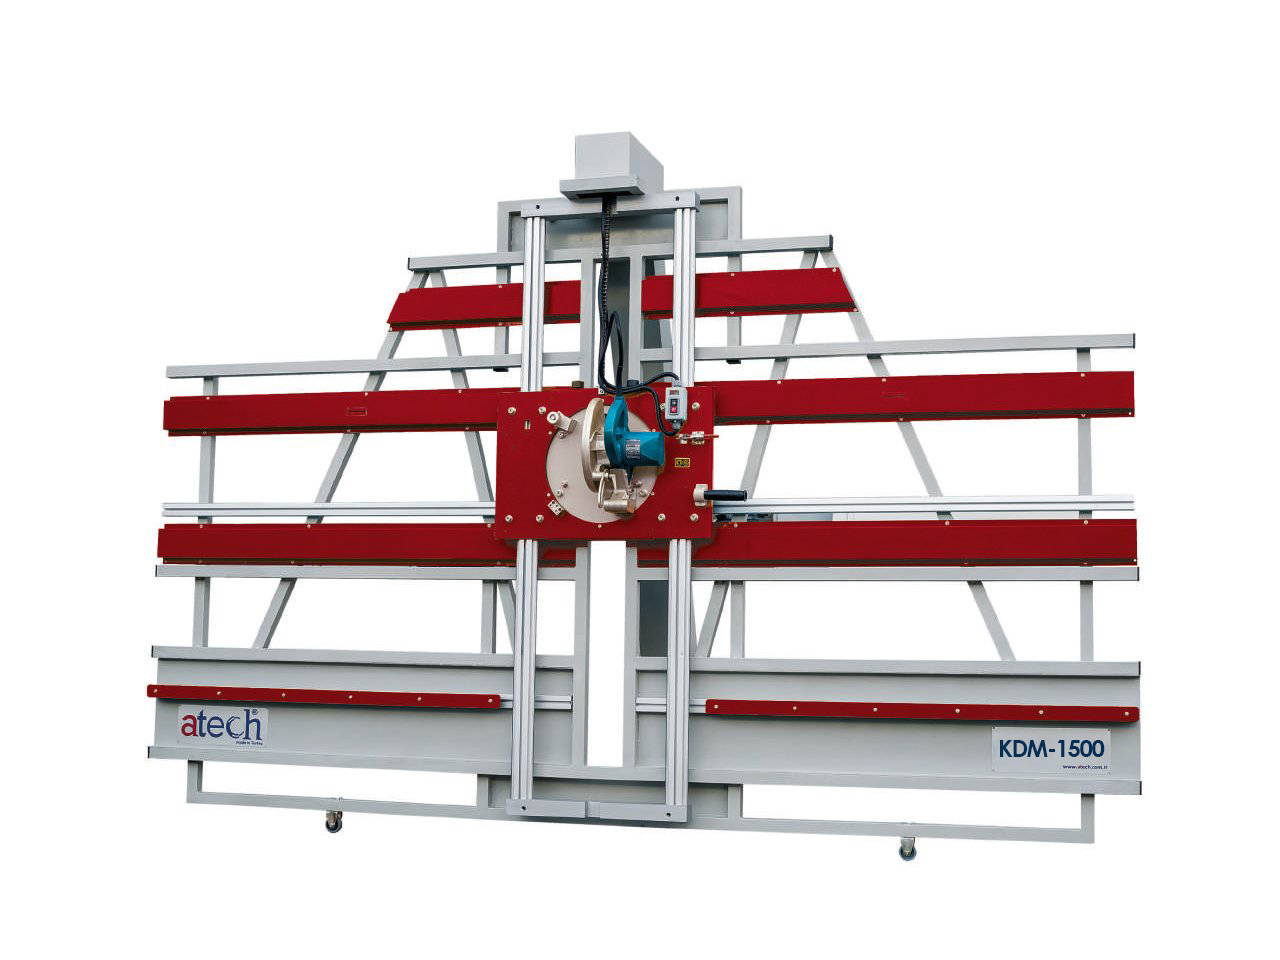 KDM-1500-Composite-Panel-Grove-and-Diemensioning-Saw